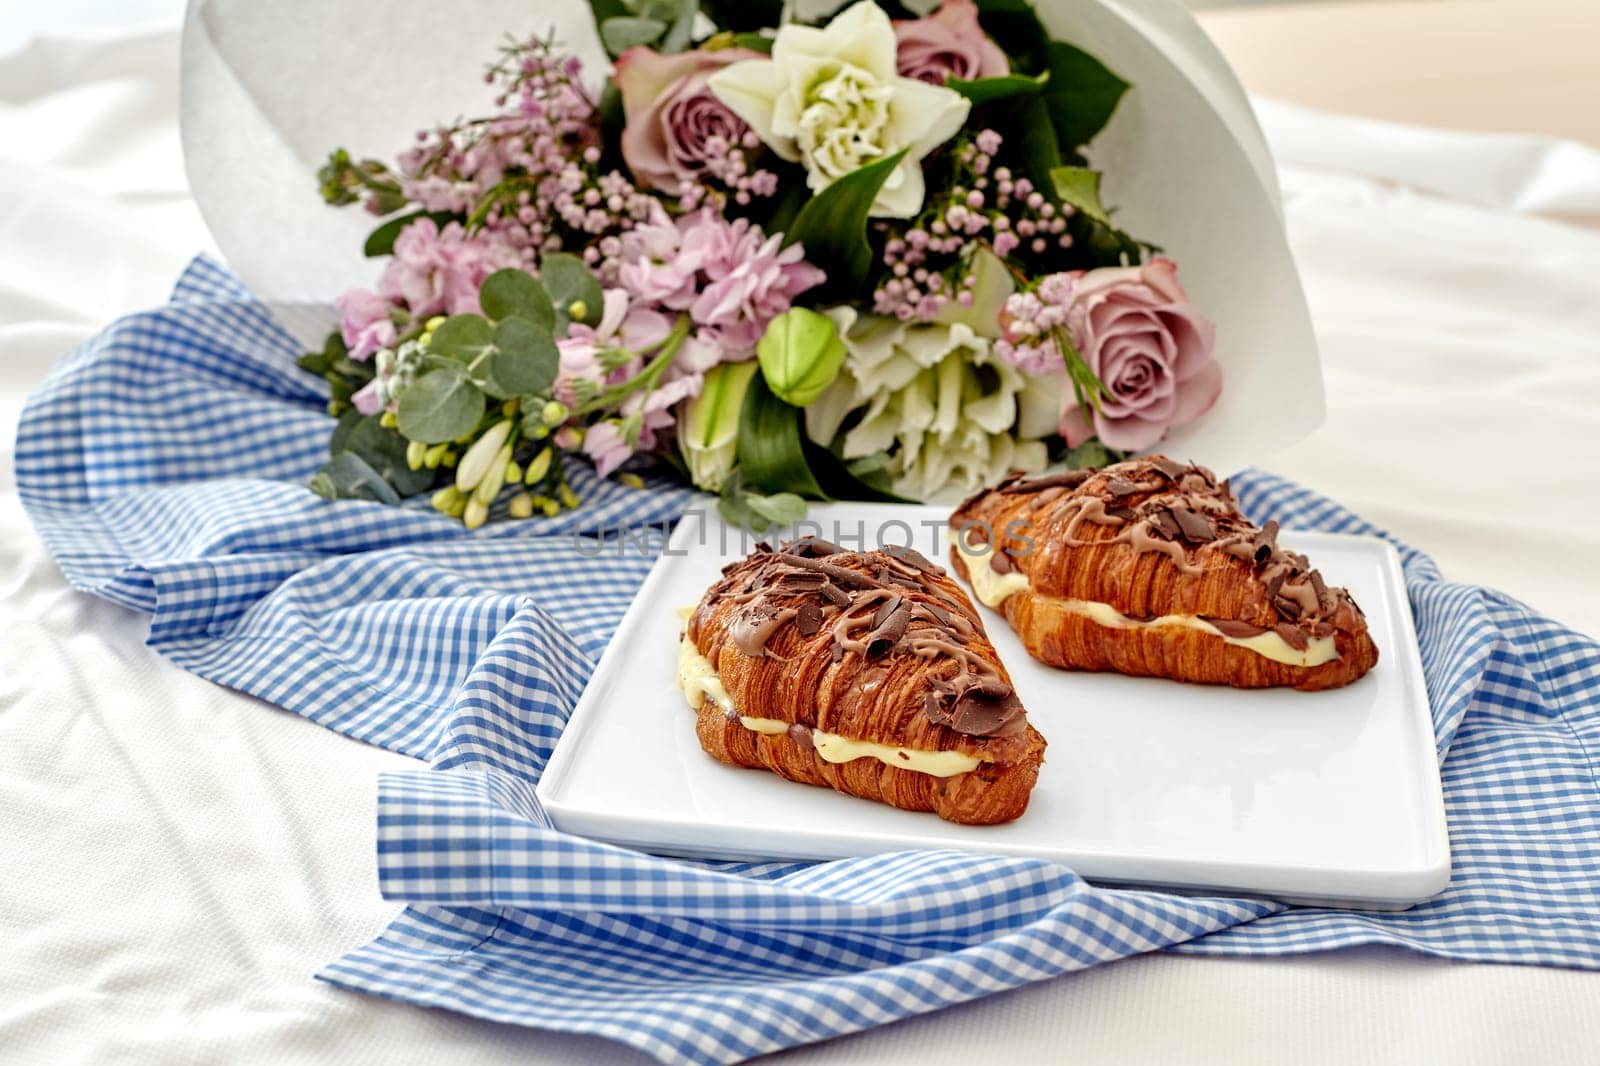 Romantic setting featuring chocolate drizzled puff French croissants sandwiches stuffed with delicate custard and fresh flower bouquet on white blue gingham cloth